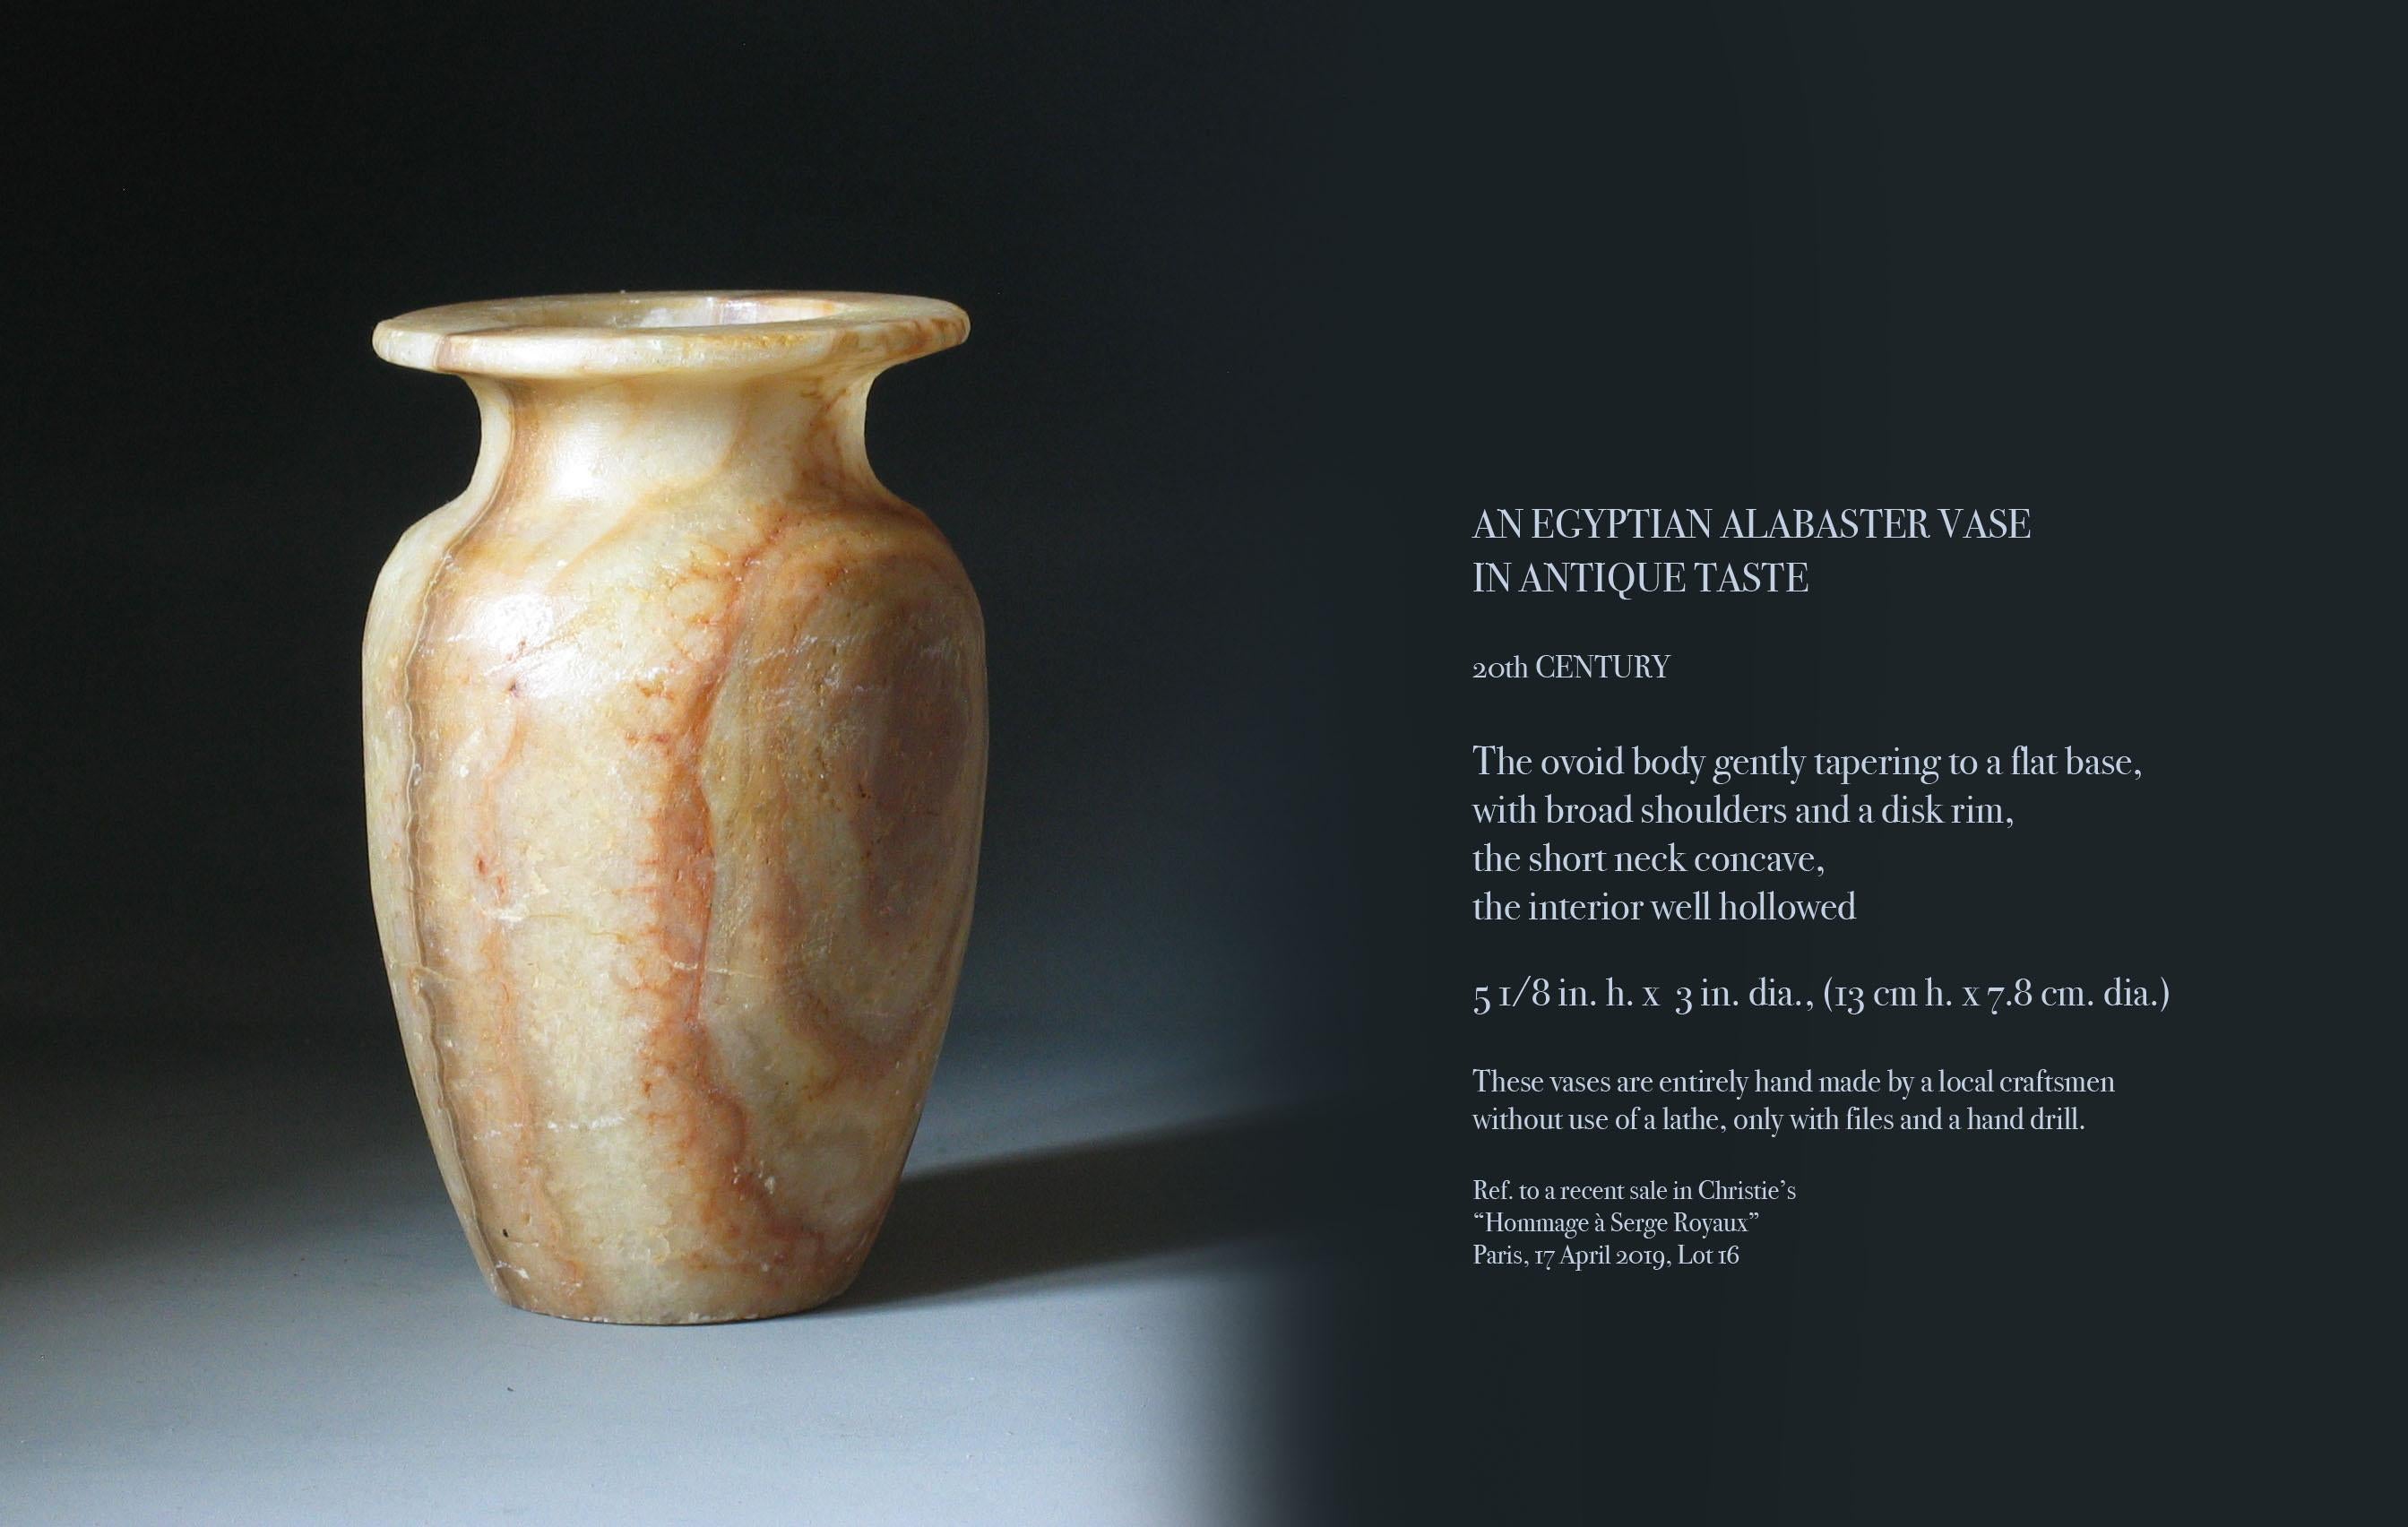 An Egyptian Alabaster vase in antique taste, 20th century. The ovoid body gently tapering to a flat base, with broad shoulders and a disk rim, the short neck is concave, the interior well hollowed. The vase measures 5 1/8